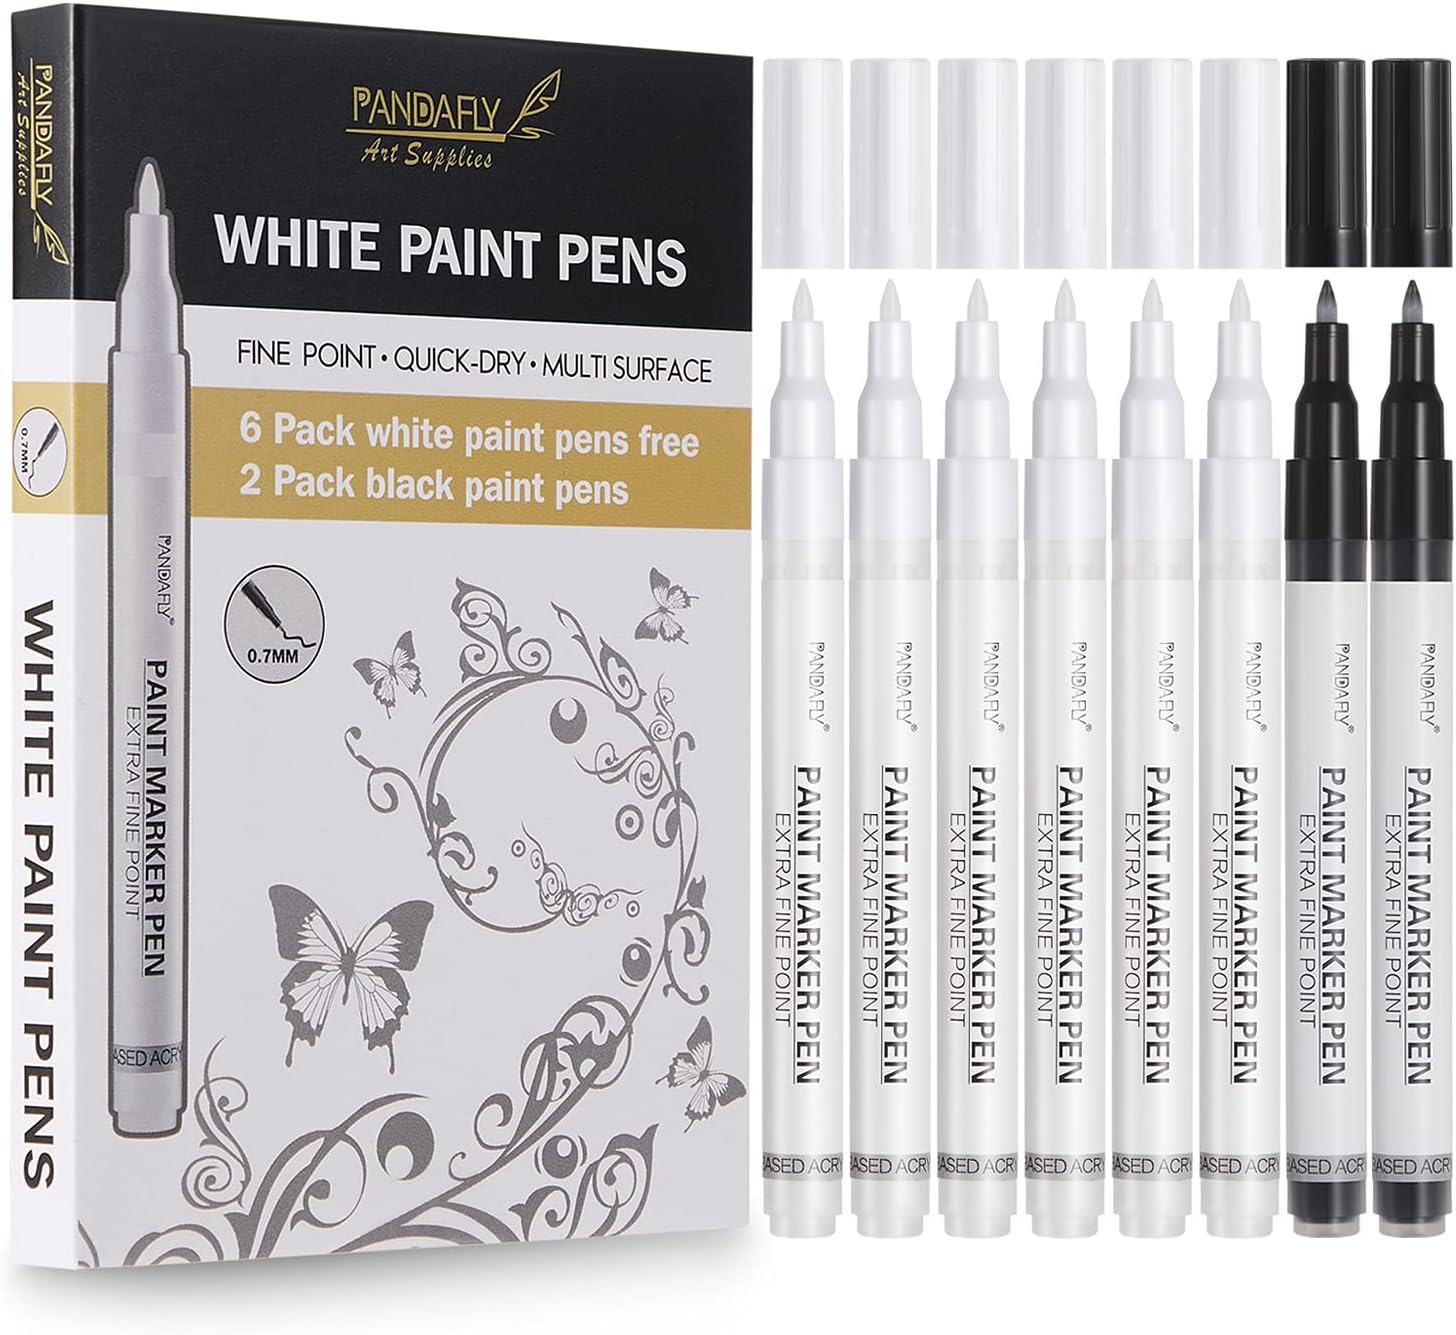 PANDAFLY White Paint Pens, 8 Pack 0.7mm Acrylic [...]